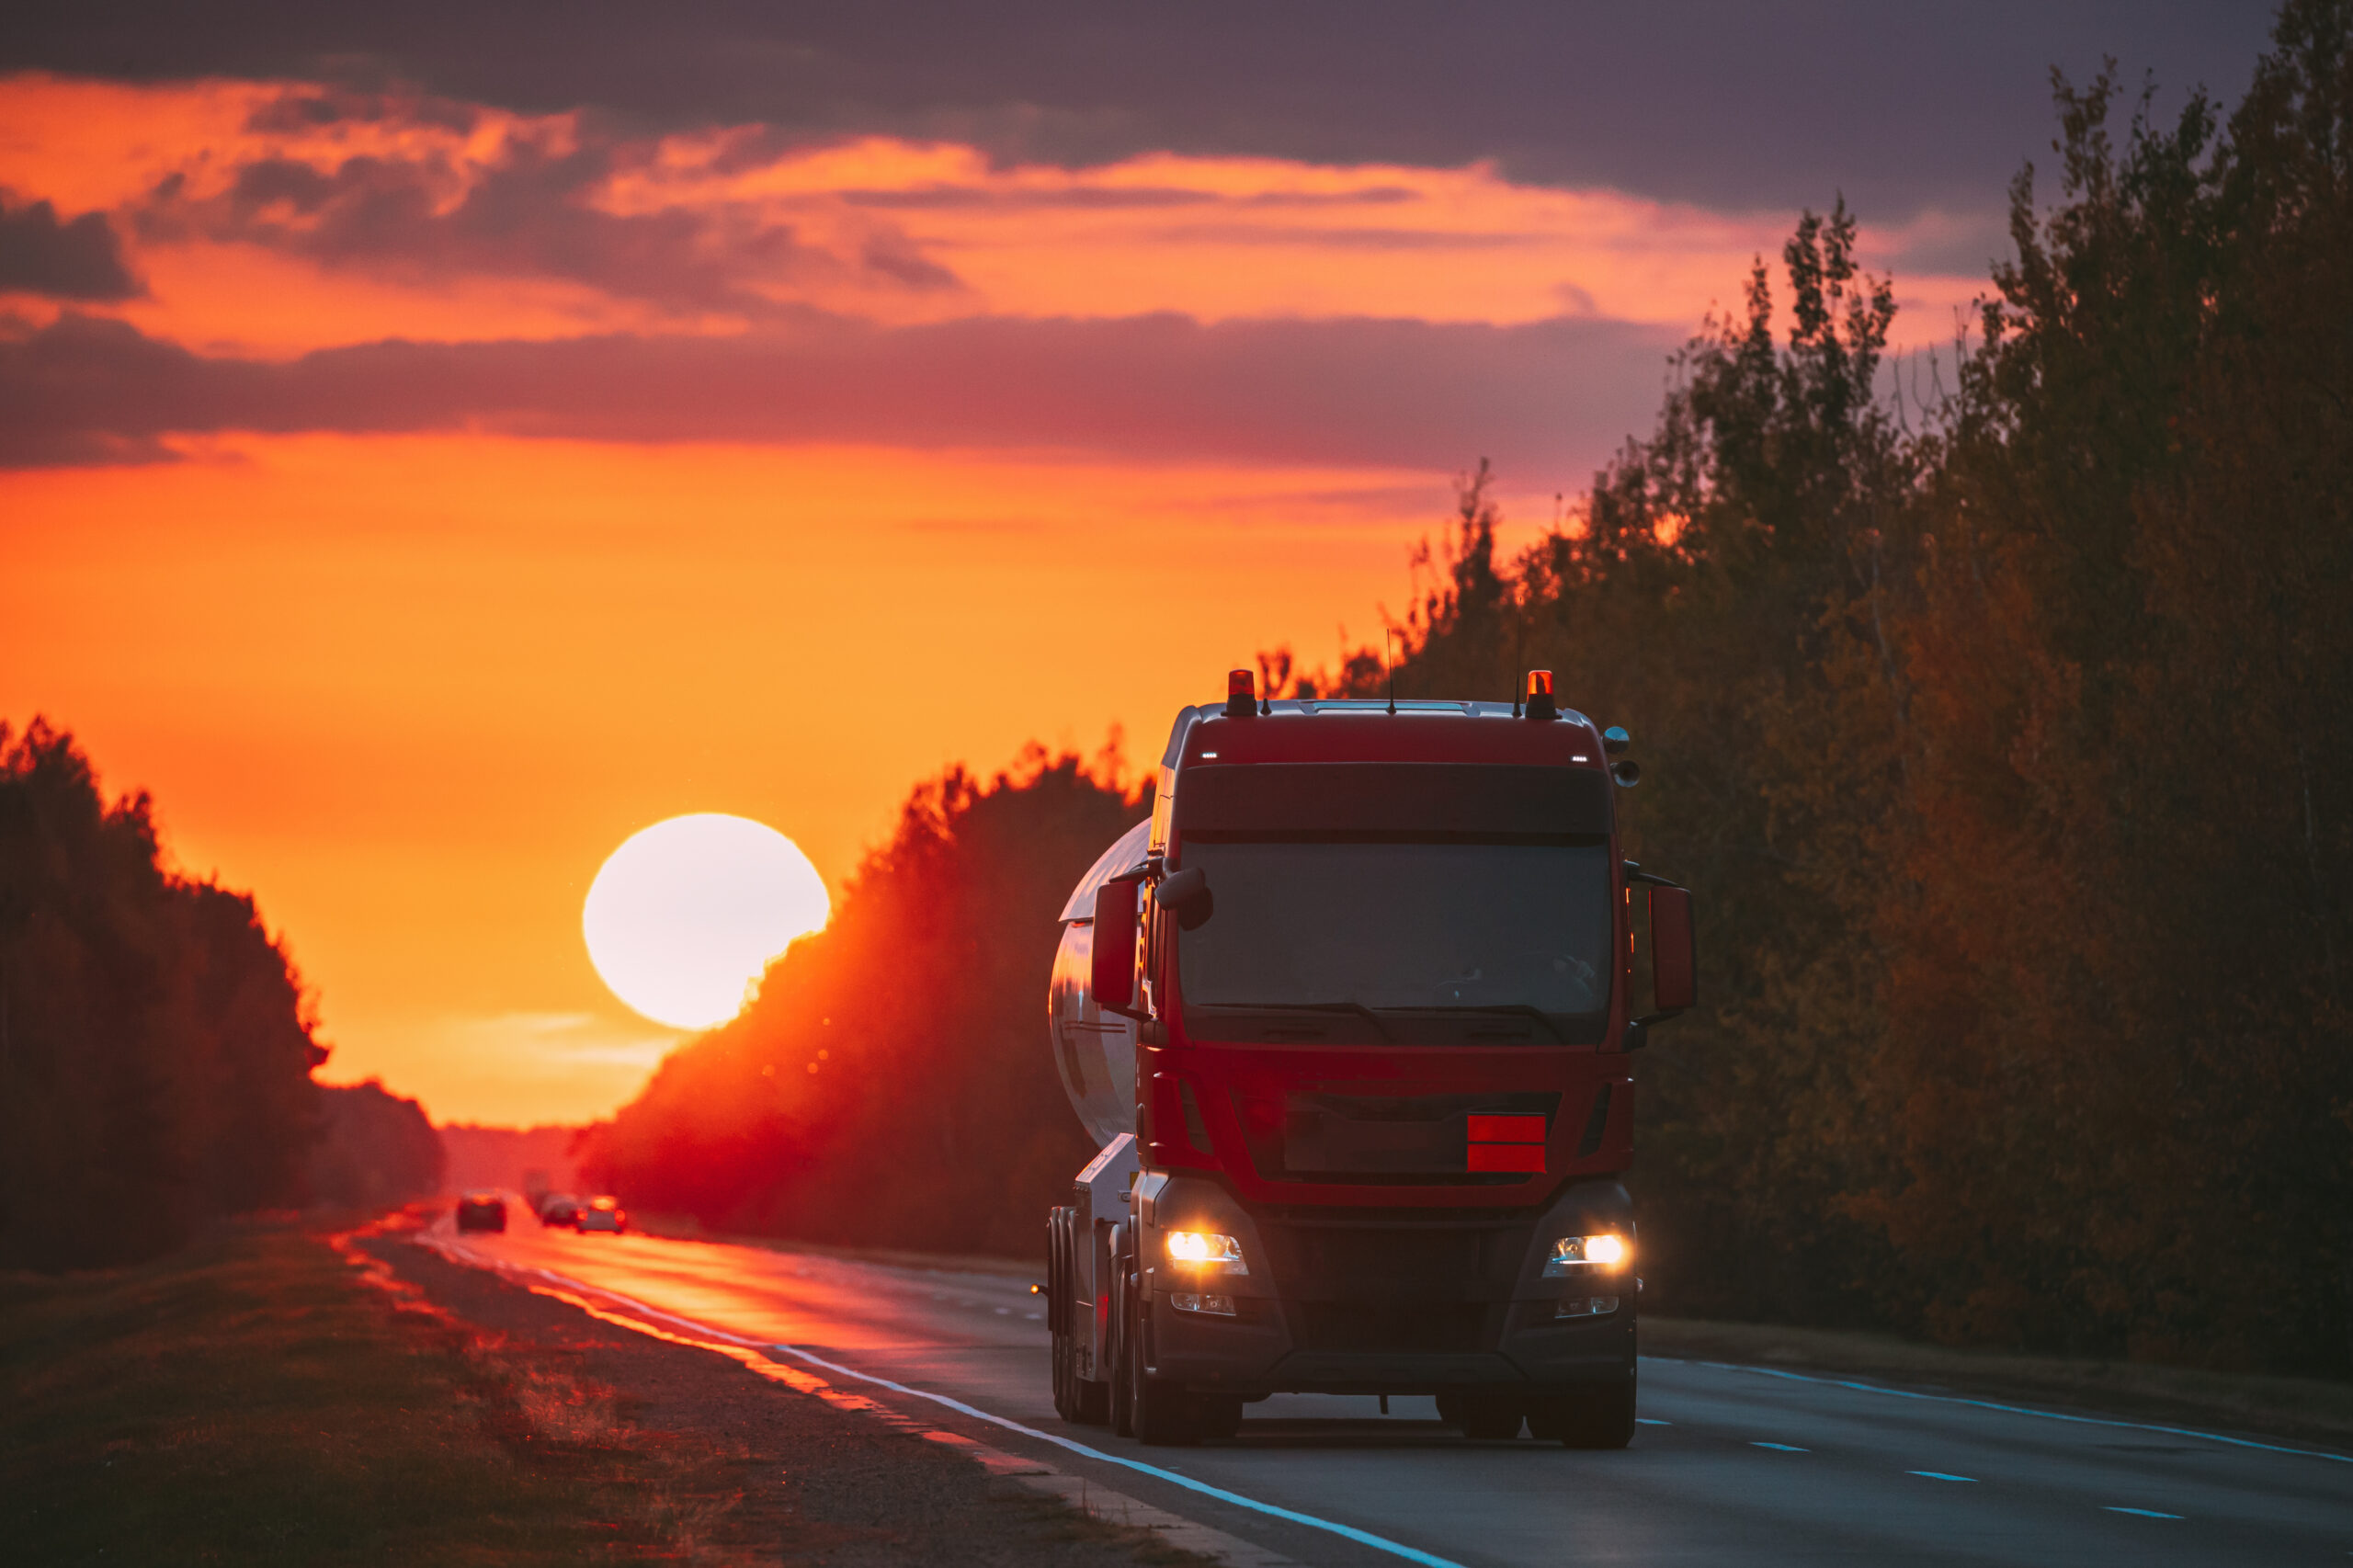 Red Truck Or Tractor Unit, Prime Mover, Traction Unit In Motion On Road, Freeway. Asphalt Motorway Highway Against Background Of Big Sunset Sun. Business Transportation And Trucking Industry